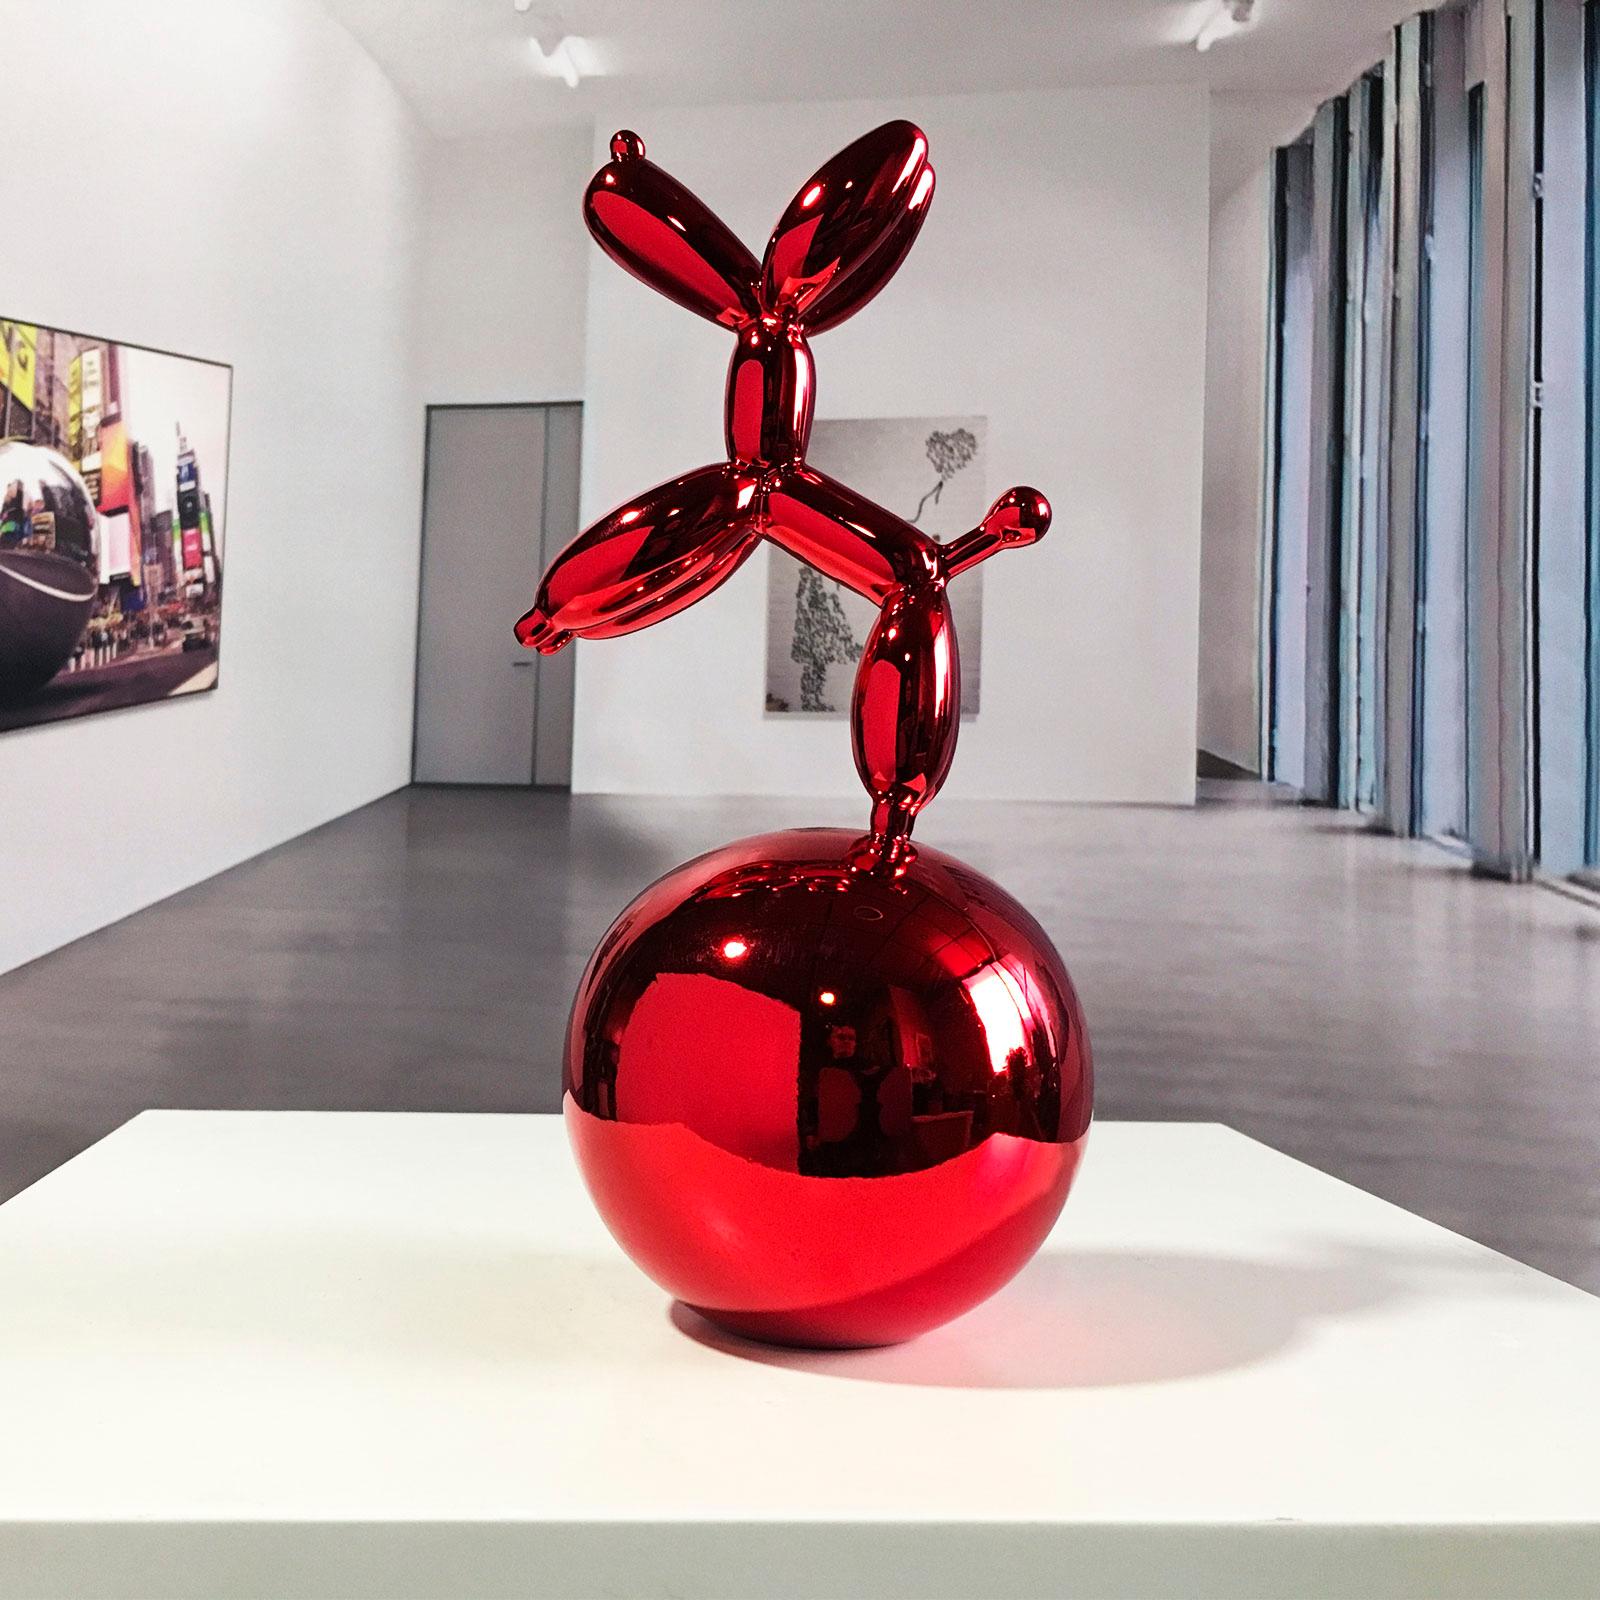 Pop Art Sculpture "Red Dog Balloon on  Nickel Sphere" by Miguel Guía.
The sculpture is made of a layer of nickel on cold smelting of copper with the base of graphite or marble dust.
Limited edition of 299 works.
Although the required time to deliver